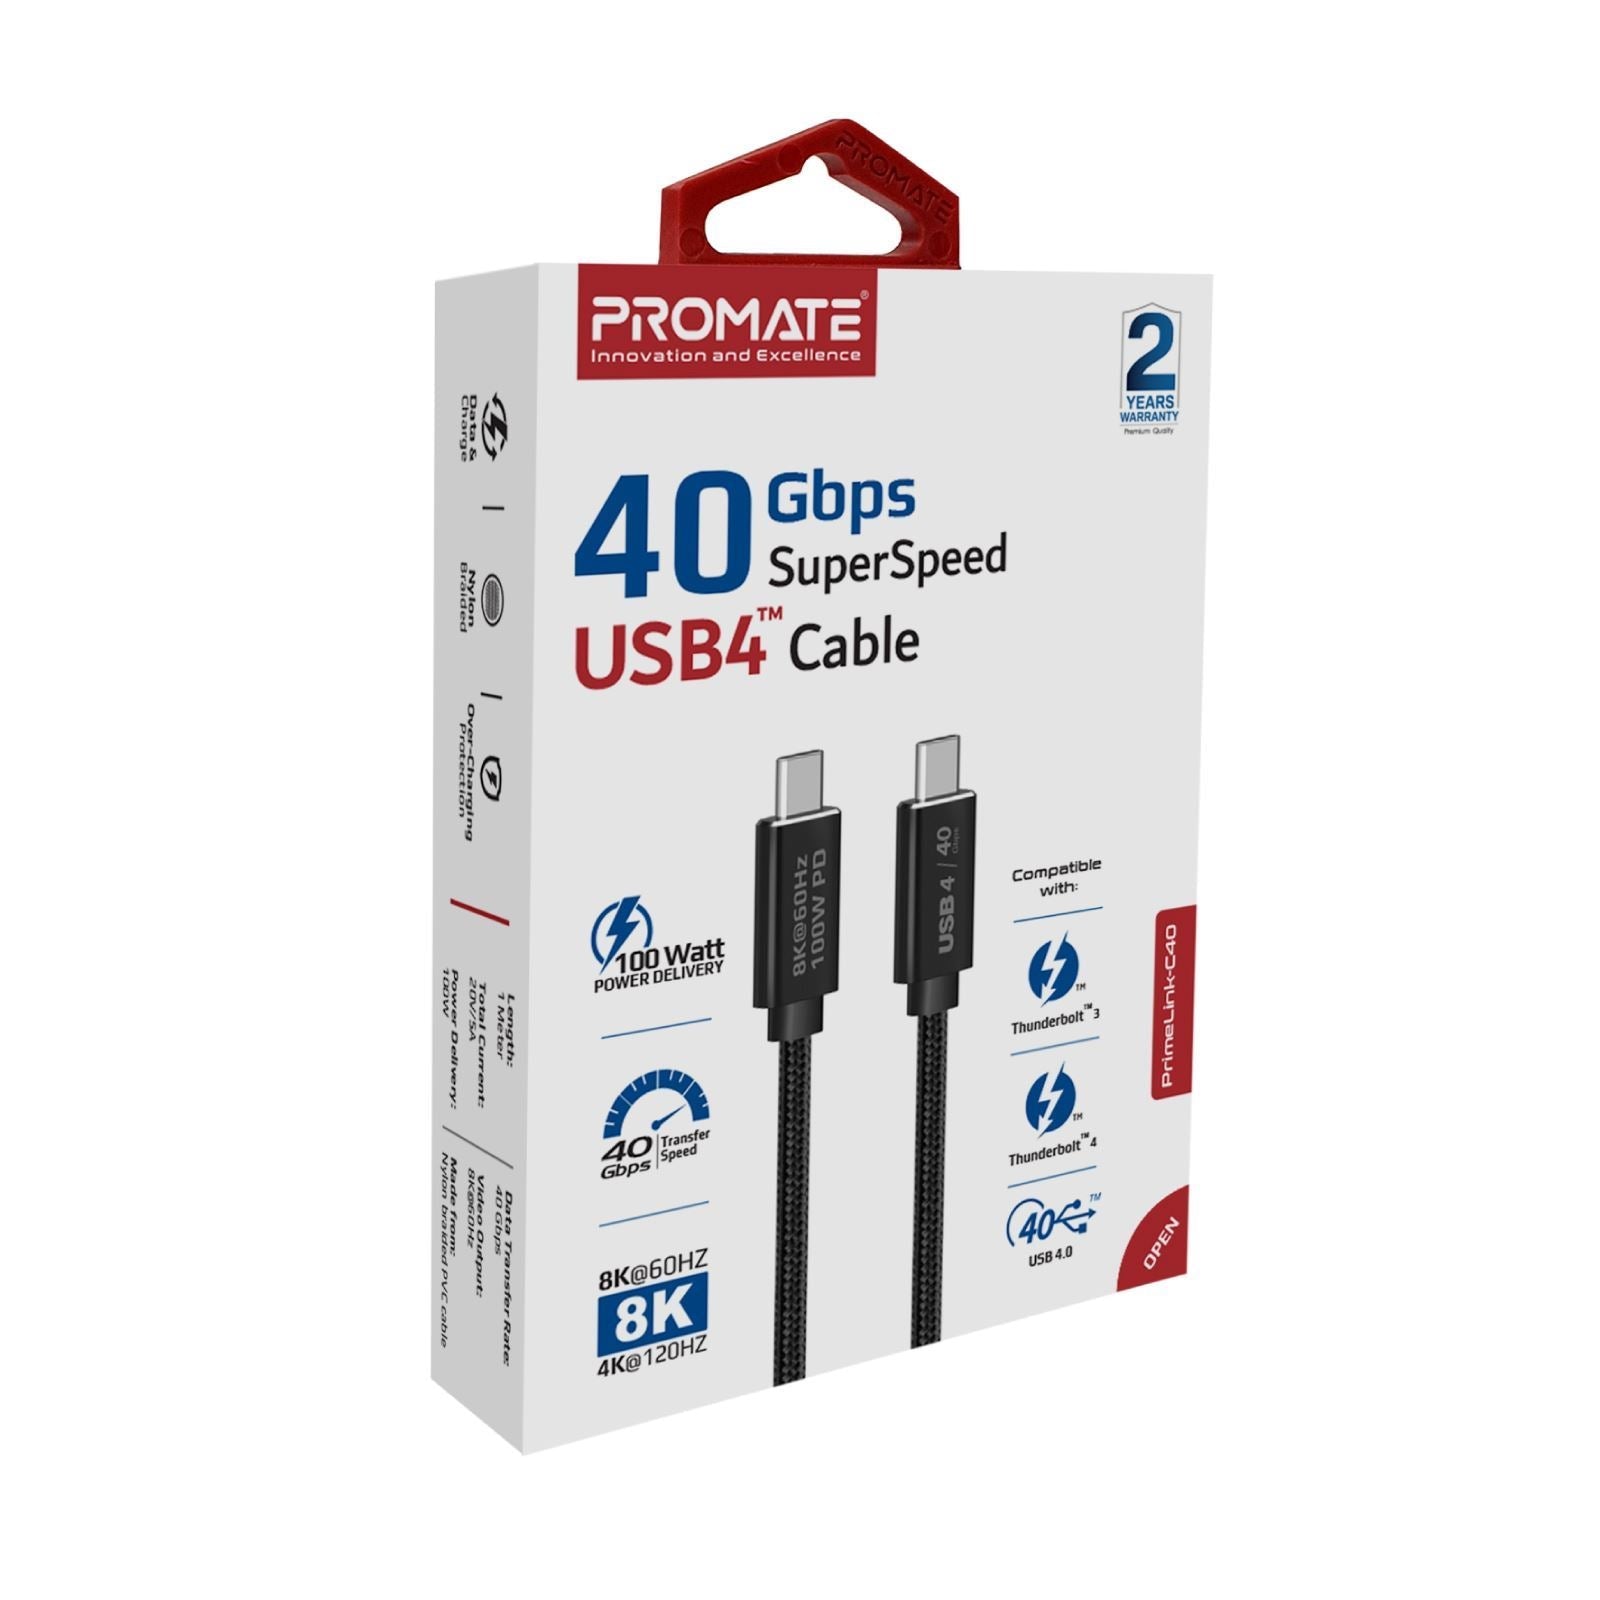 PROMATE_1m_USB-C_Thunderbolt_Cable._Supports_40Gps_&_100W_PD._Supports_Up_to_8k@60Hz,_Durable_Long-Life_Fabric_PVC._Black_Colour. 1674